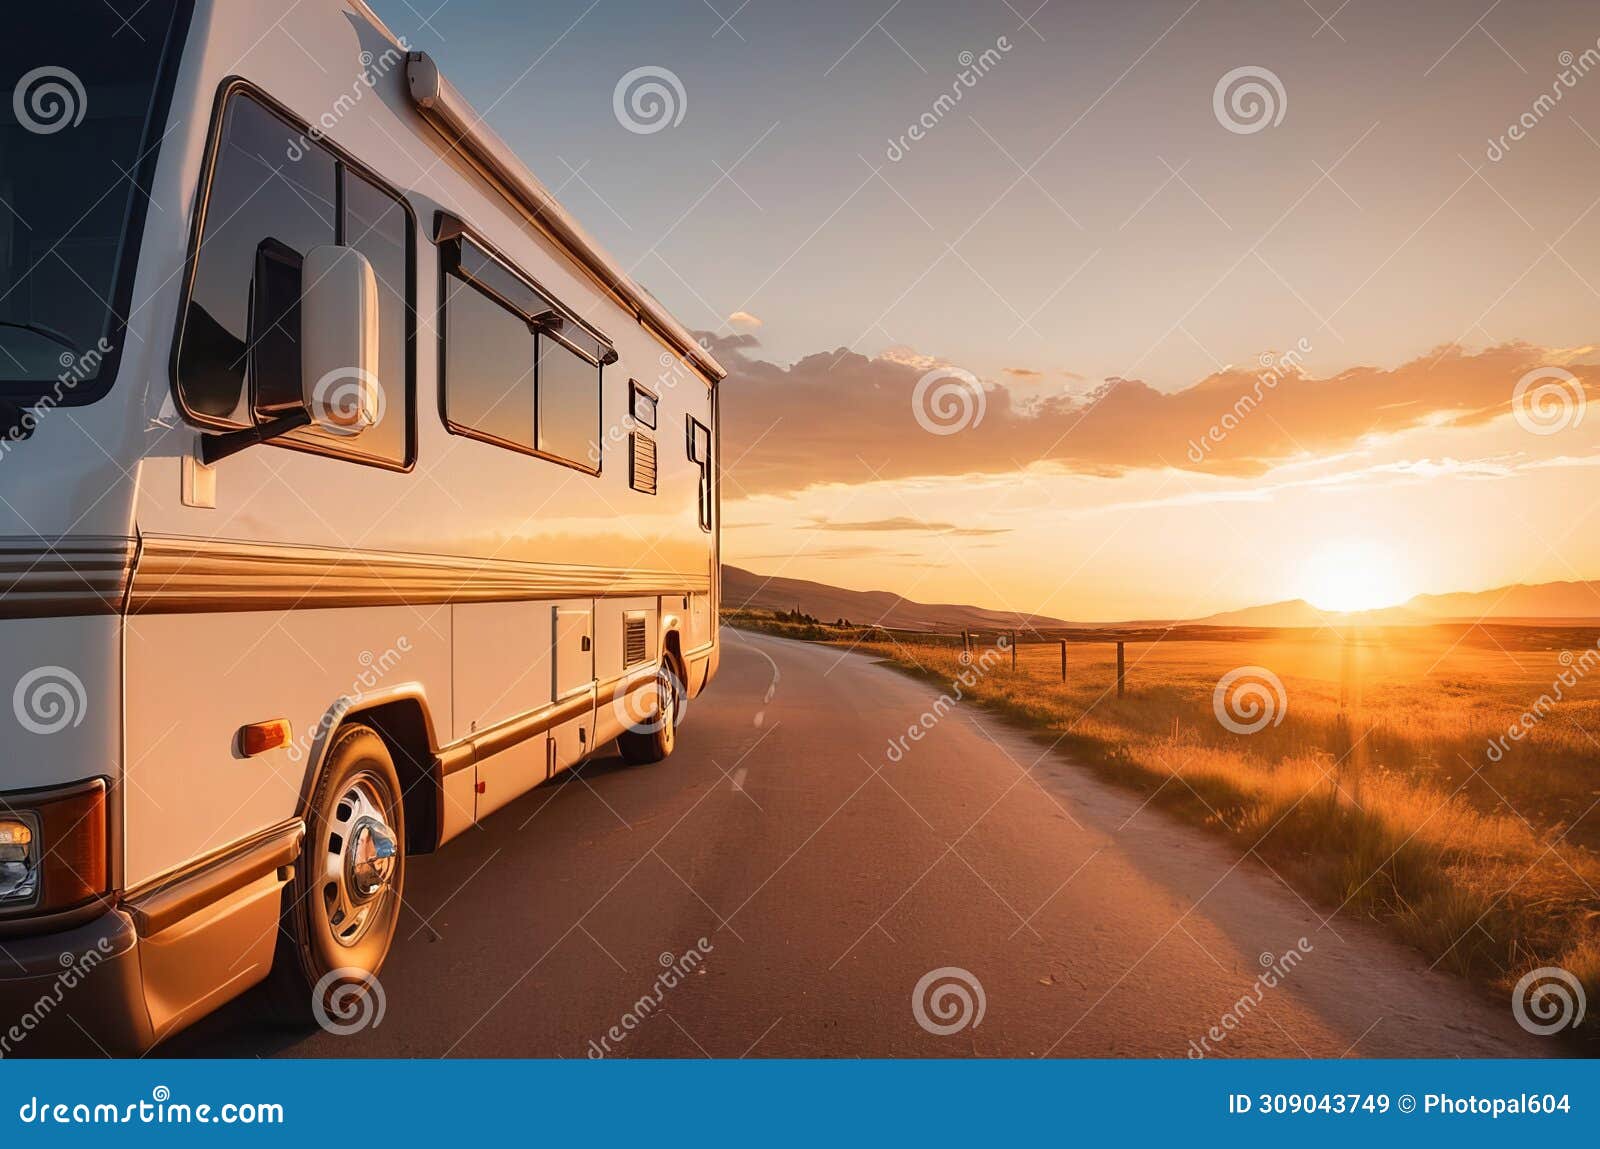 embark on unforgettable family adventures: sunset rv holiday trips and motorhome travel.